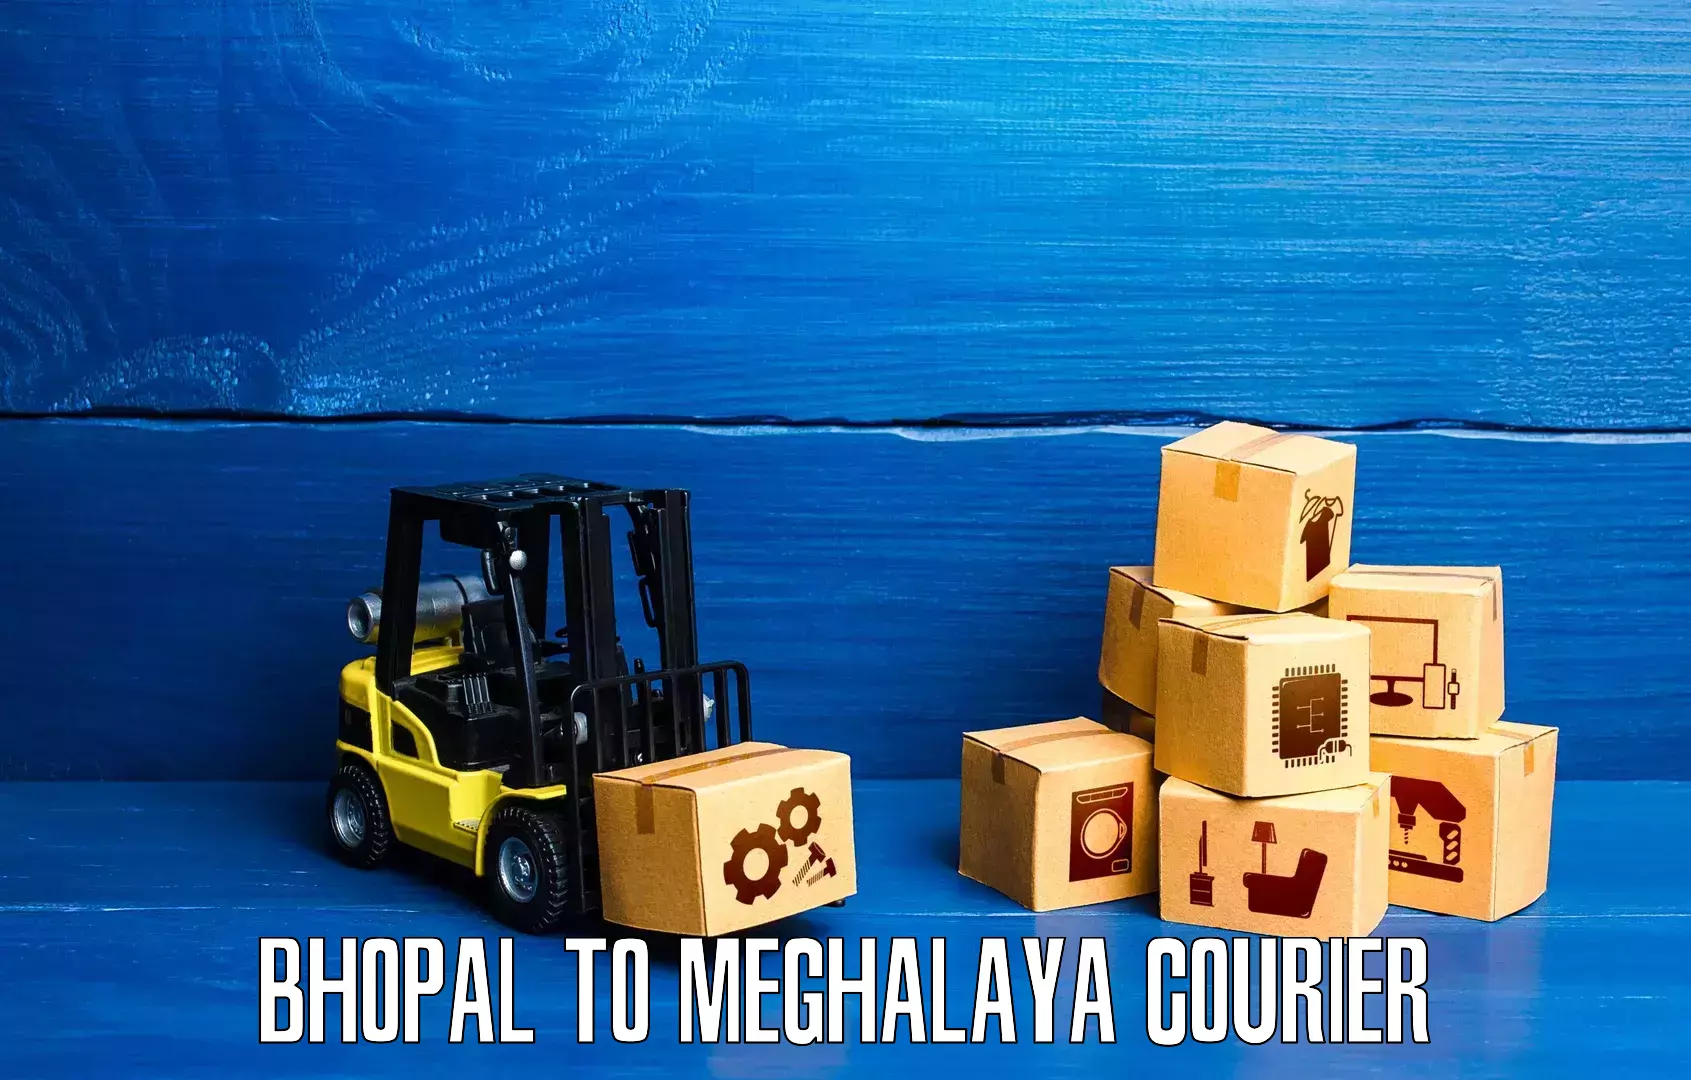 Affordable parcel service Bhopal to Meghalaya